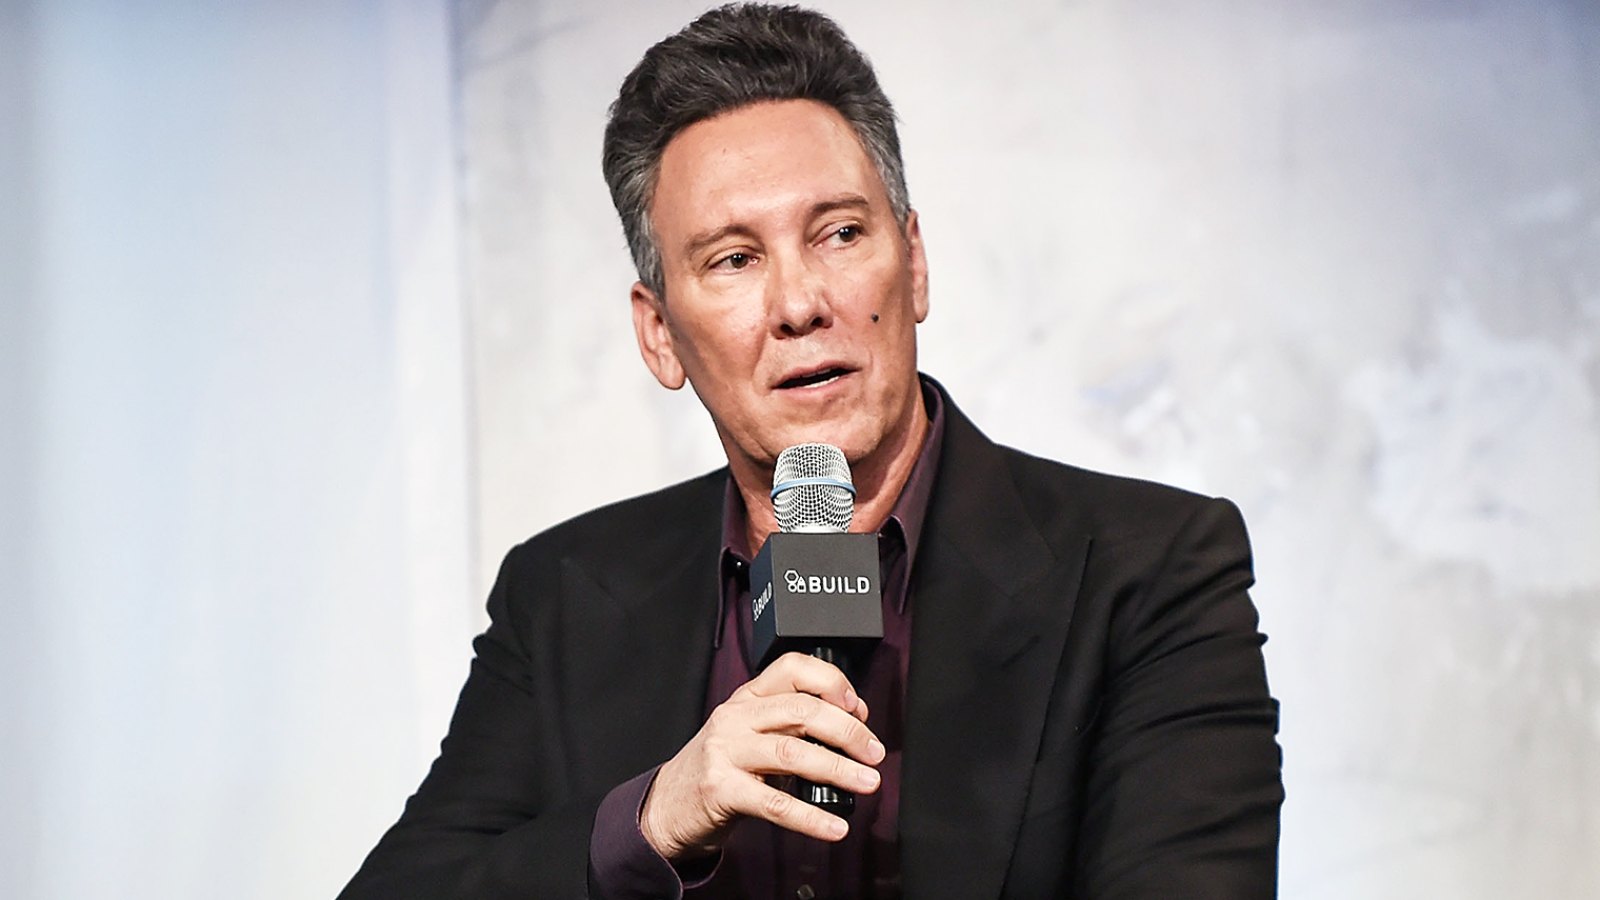 Jeff Franklin Speaks Out After Being Fired From Fuller House